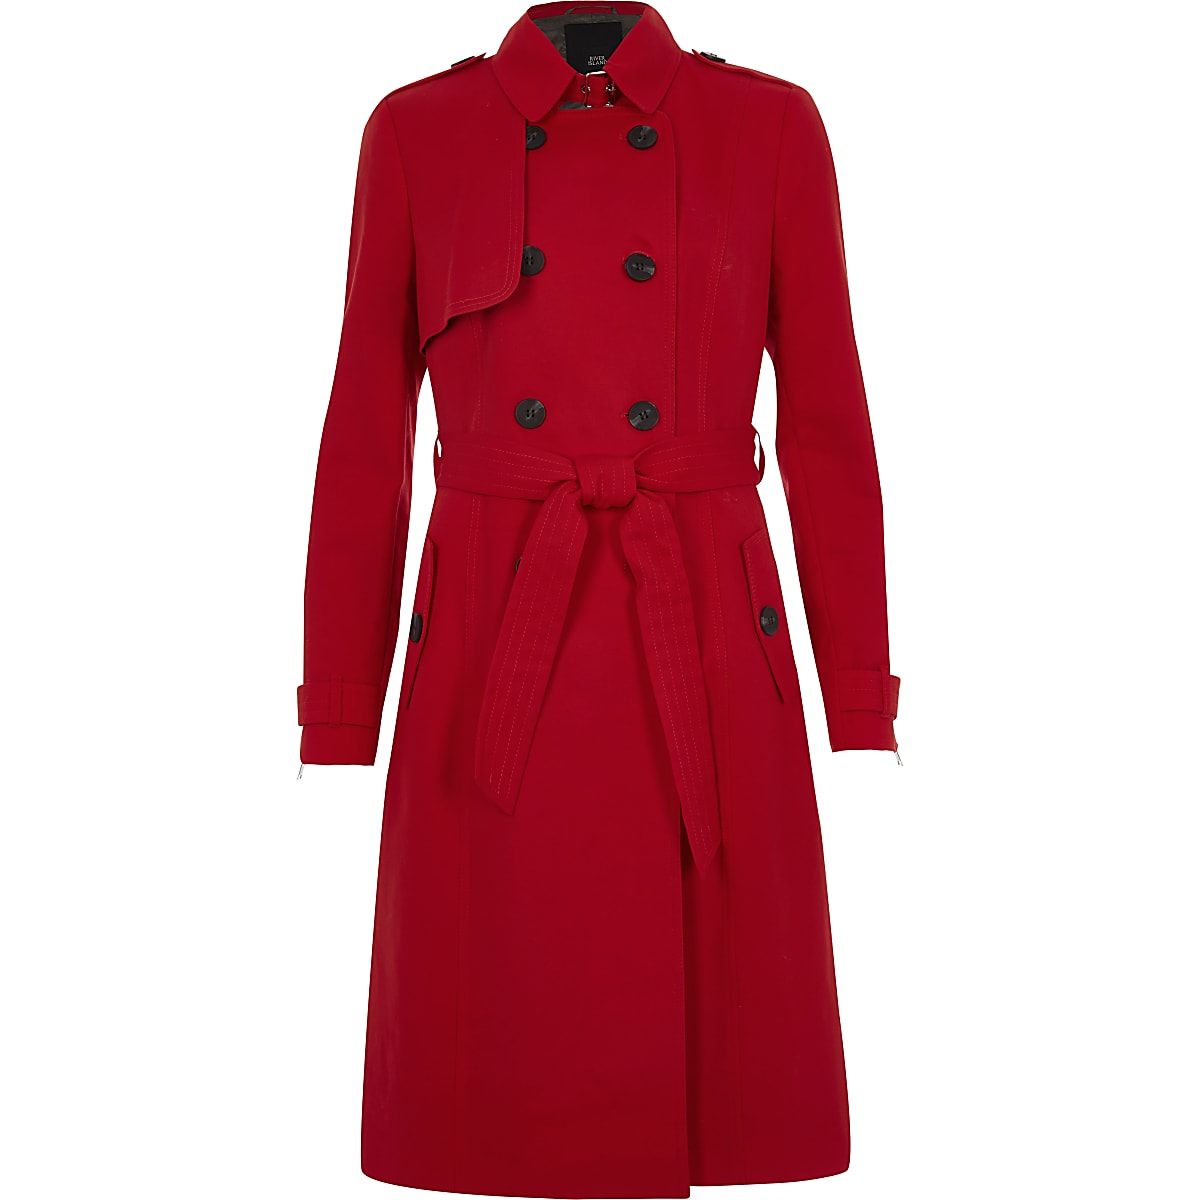 Red belted trench coat - Coats - Coats & Jackets - women